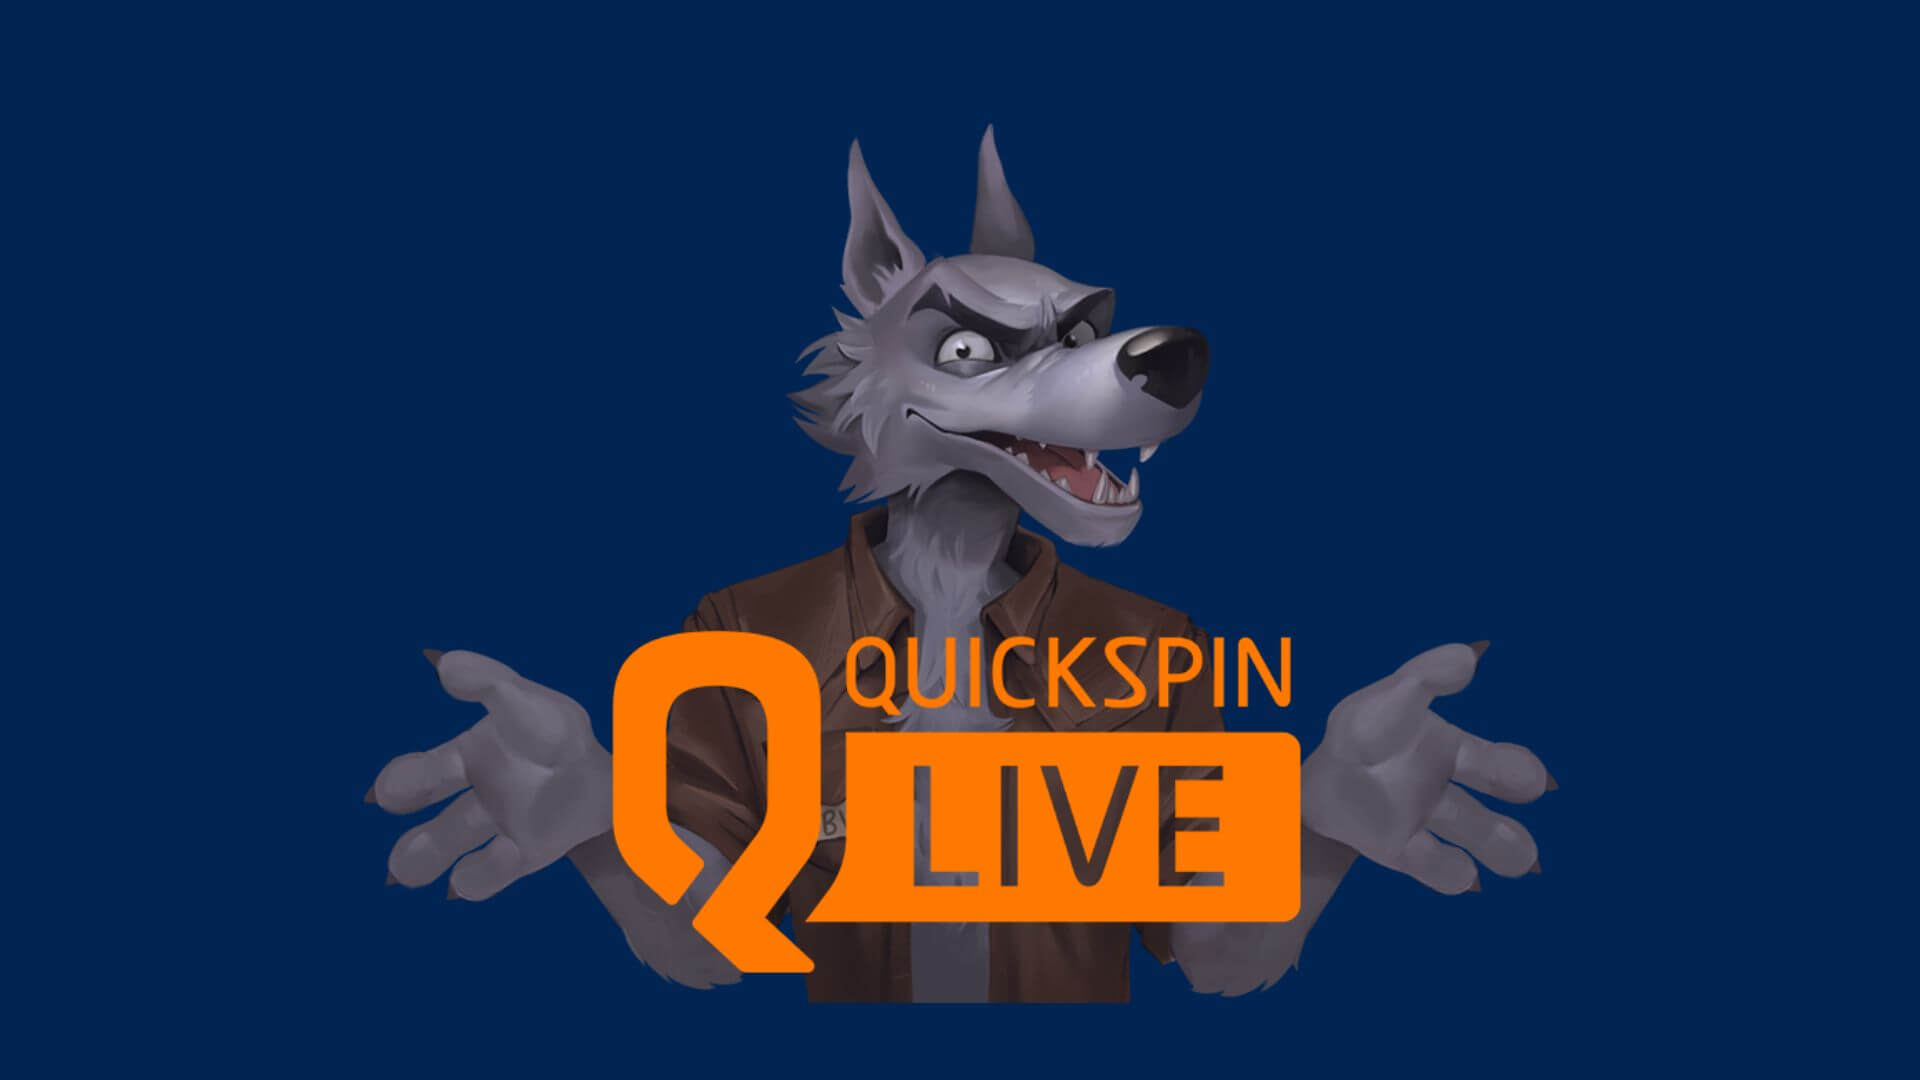 ‘Quickspin Live’ is All Set to Offer Live Casino Games